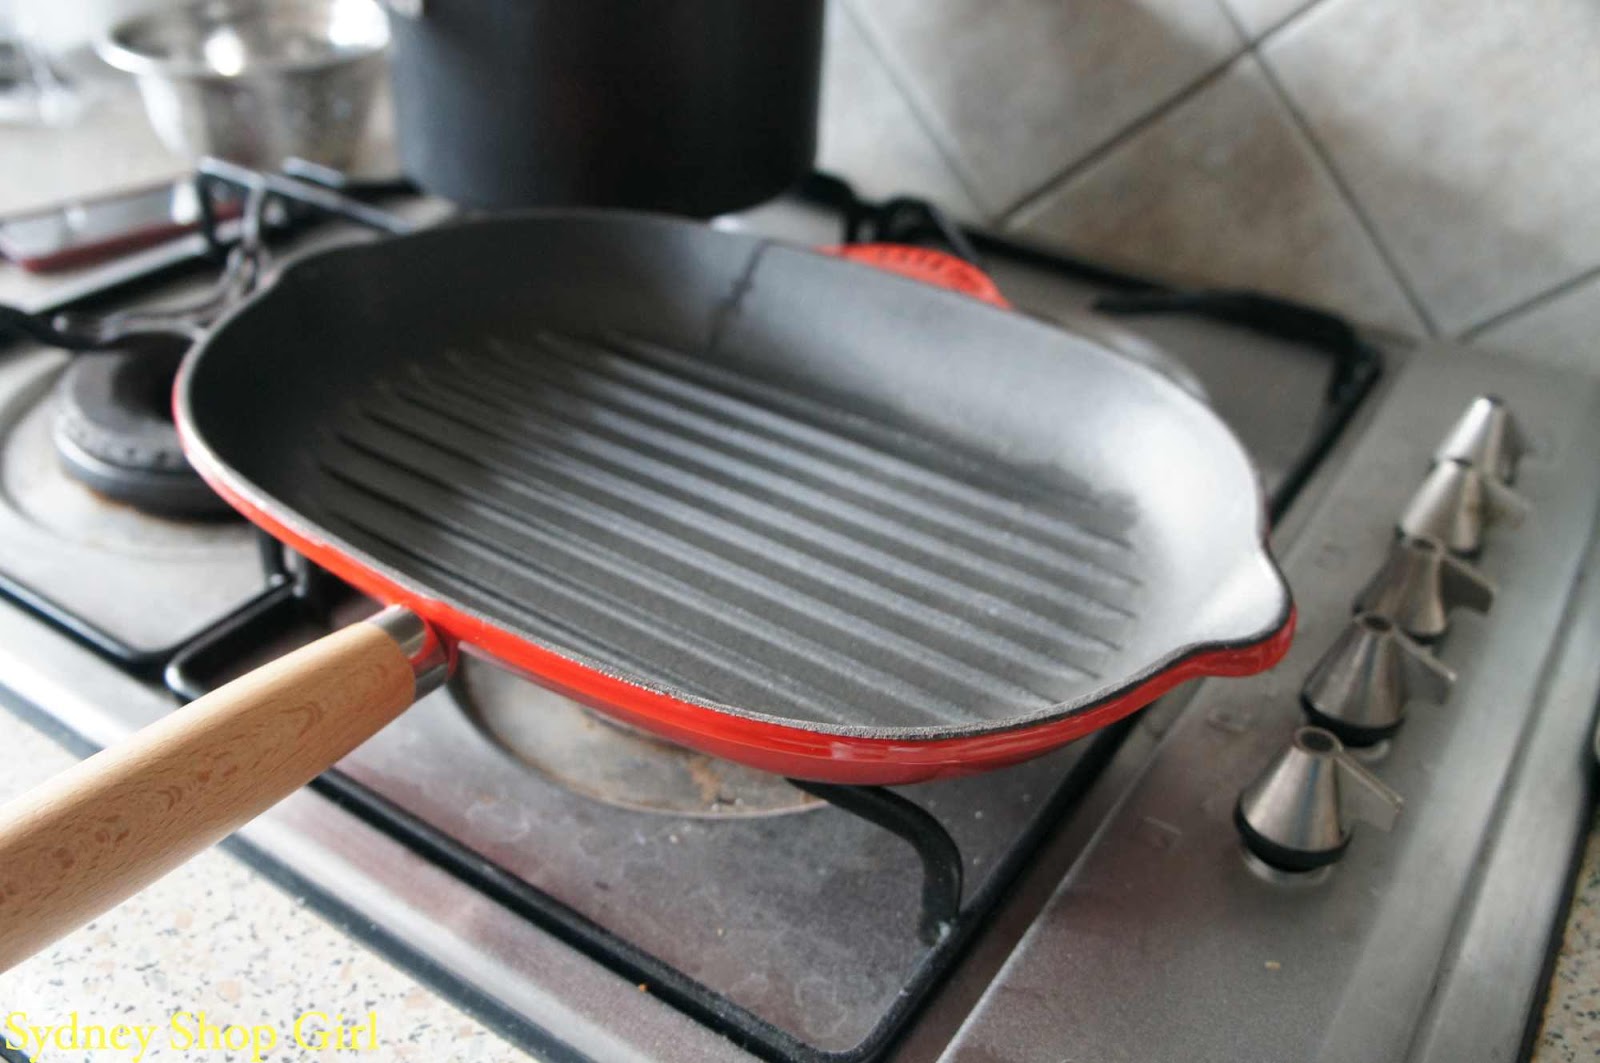 Crofton Cast Iron - Cheap, Chic and Rather Good. - Sydney Shop Girl